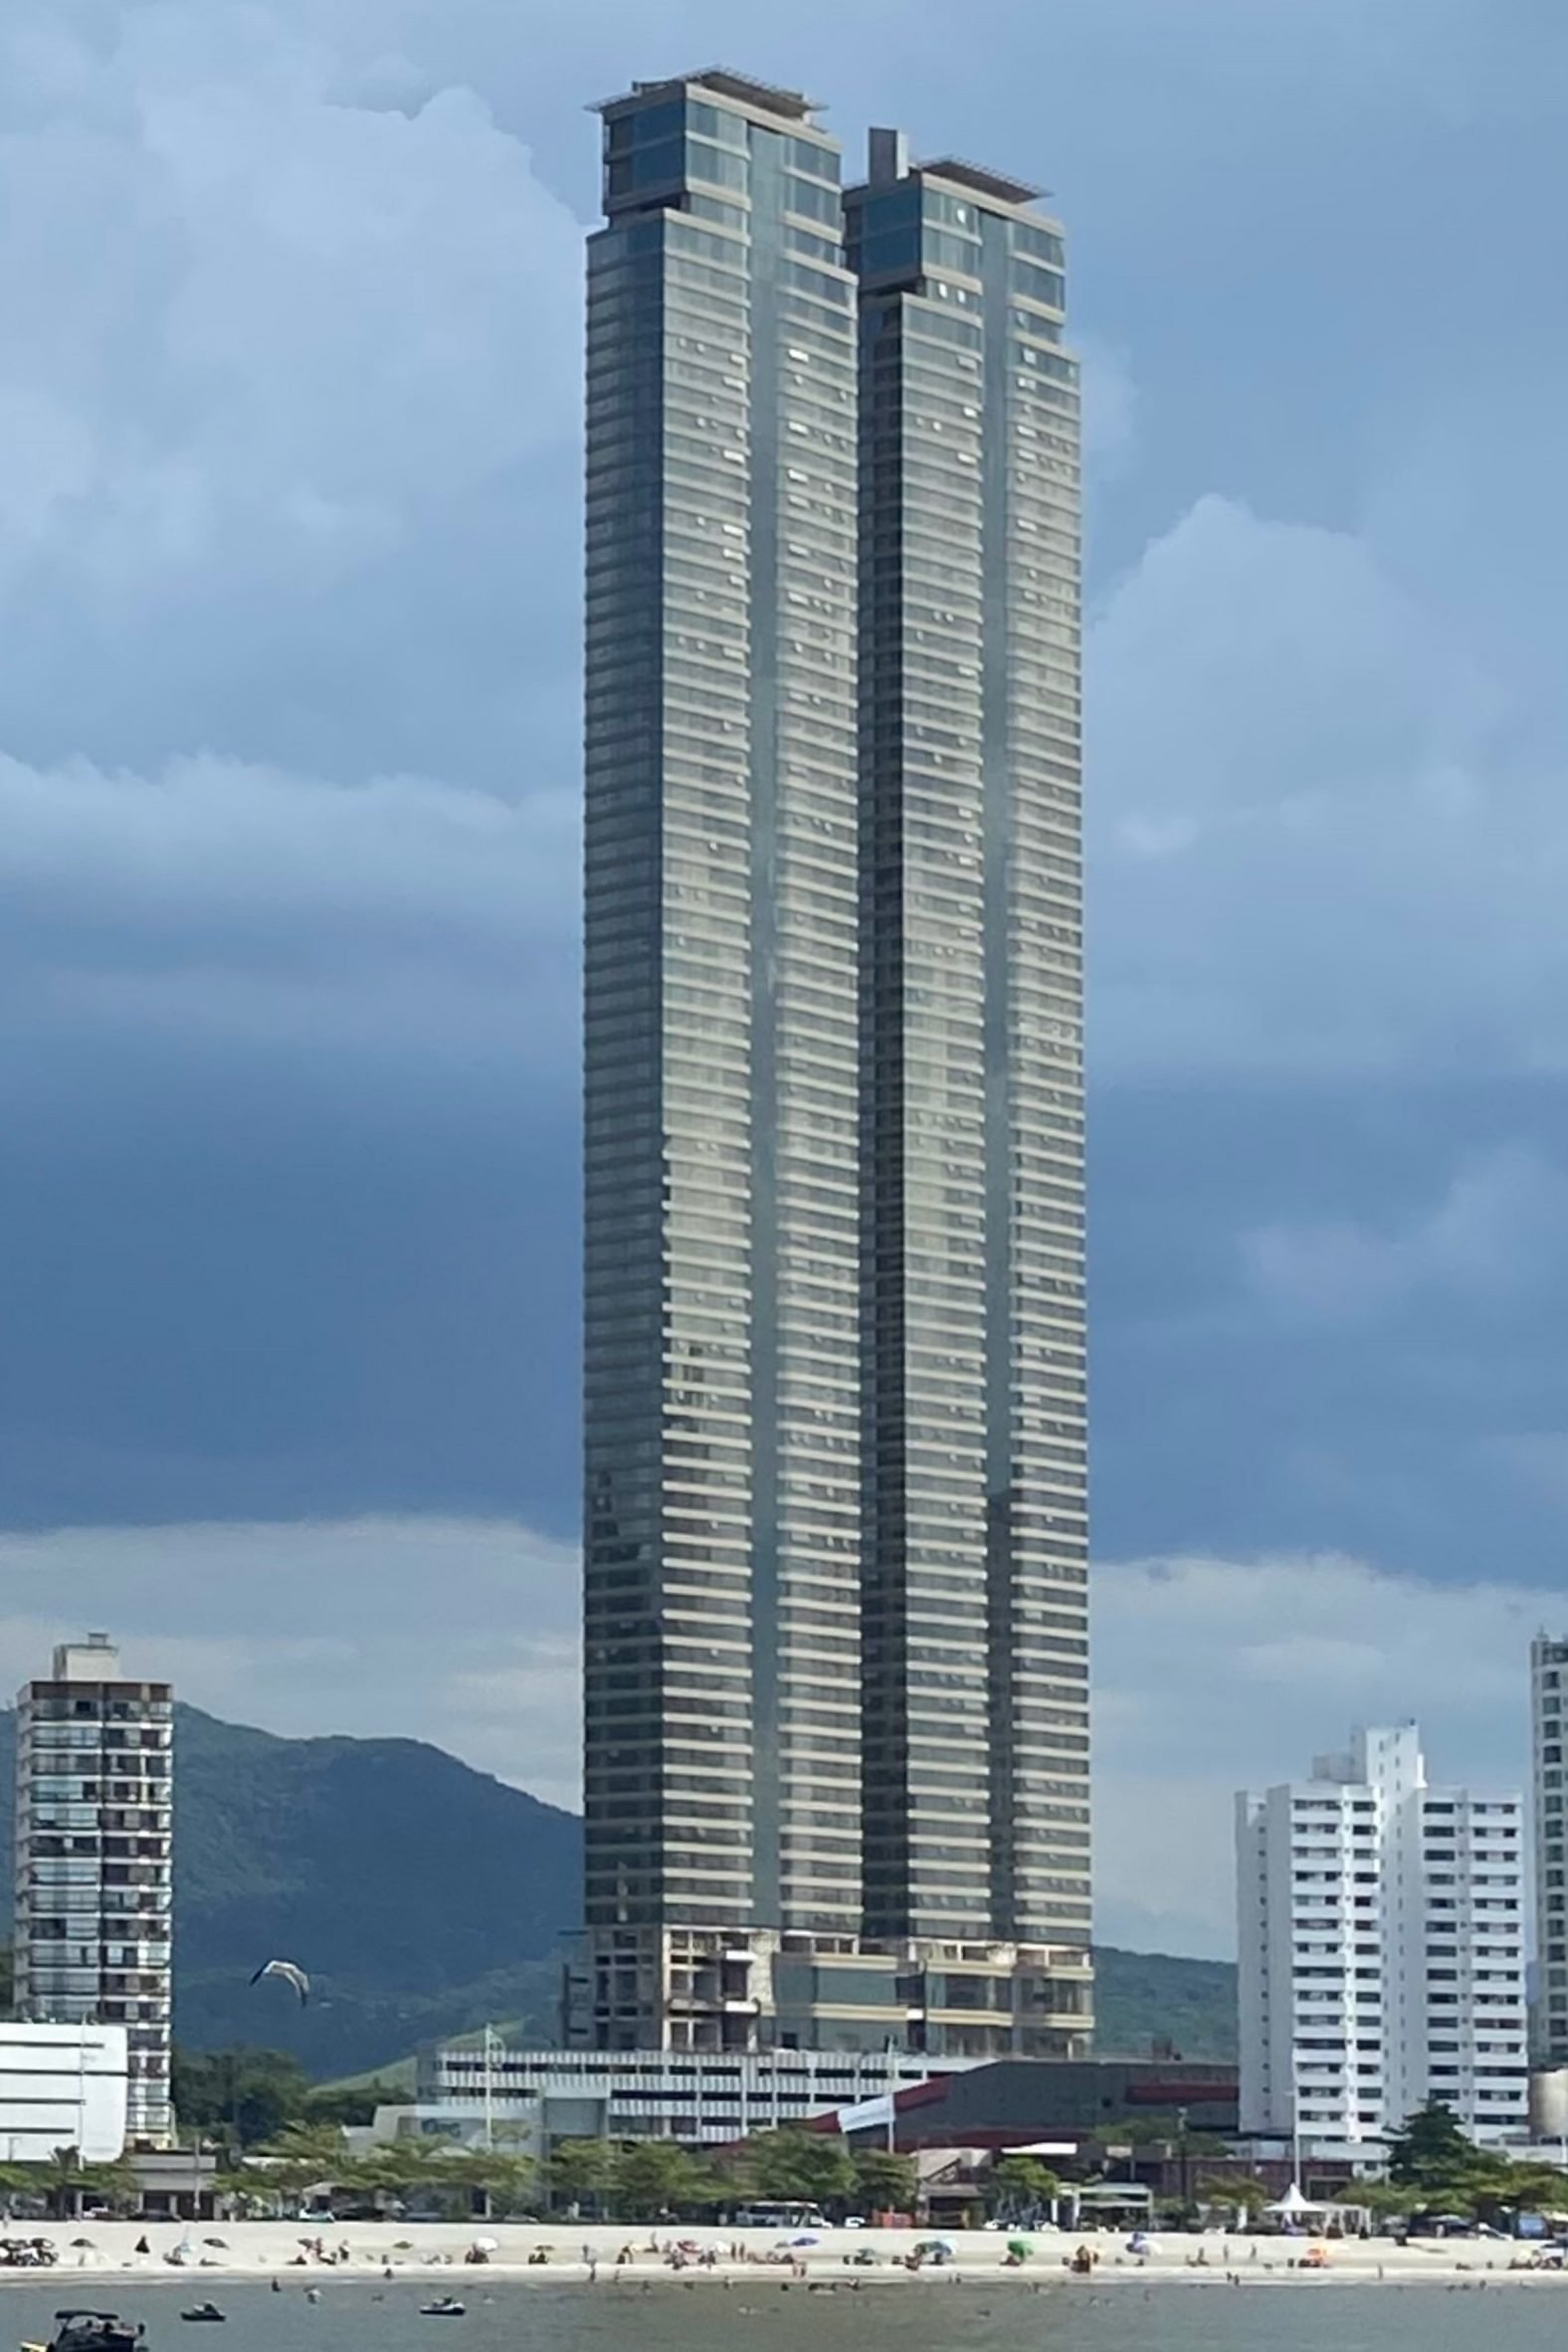 Towers in Brazil